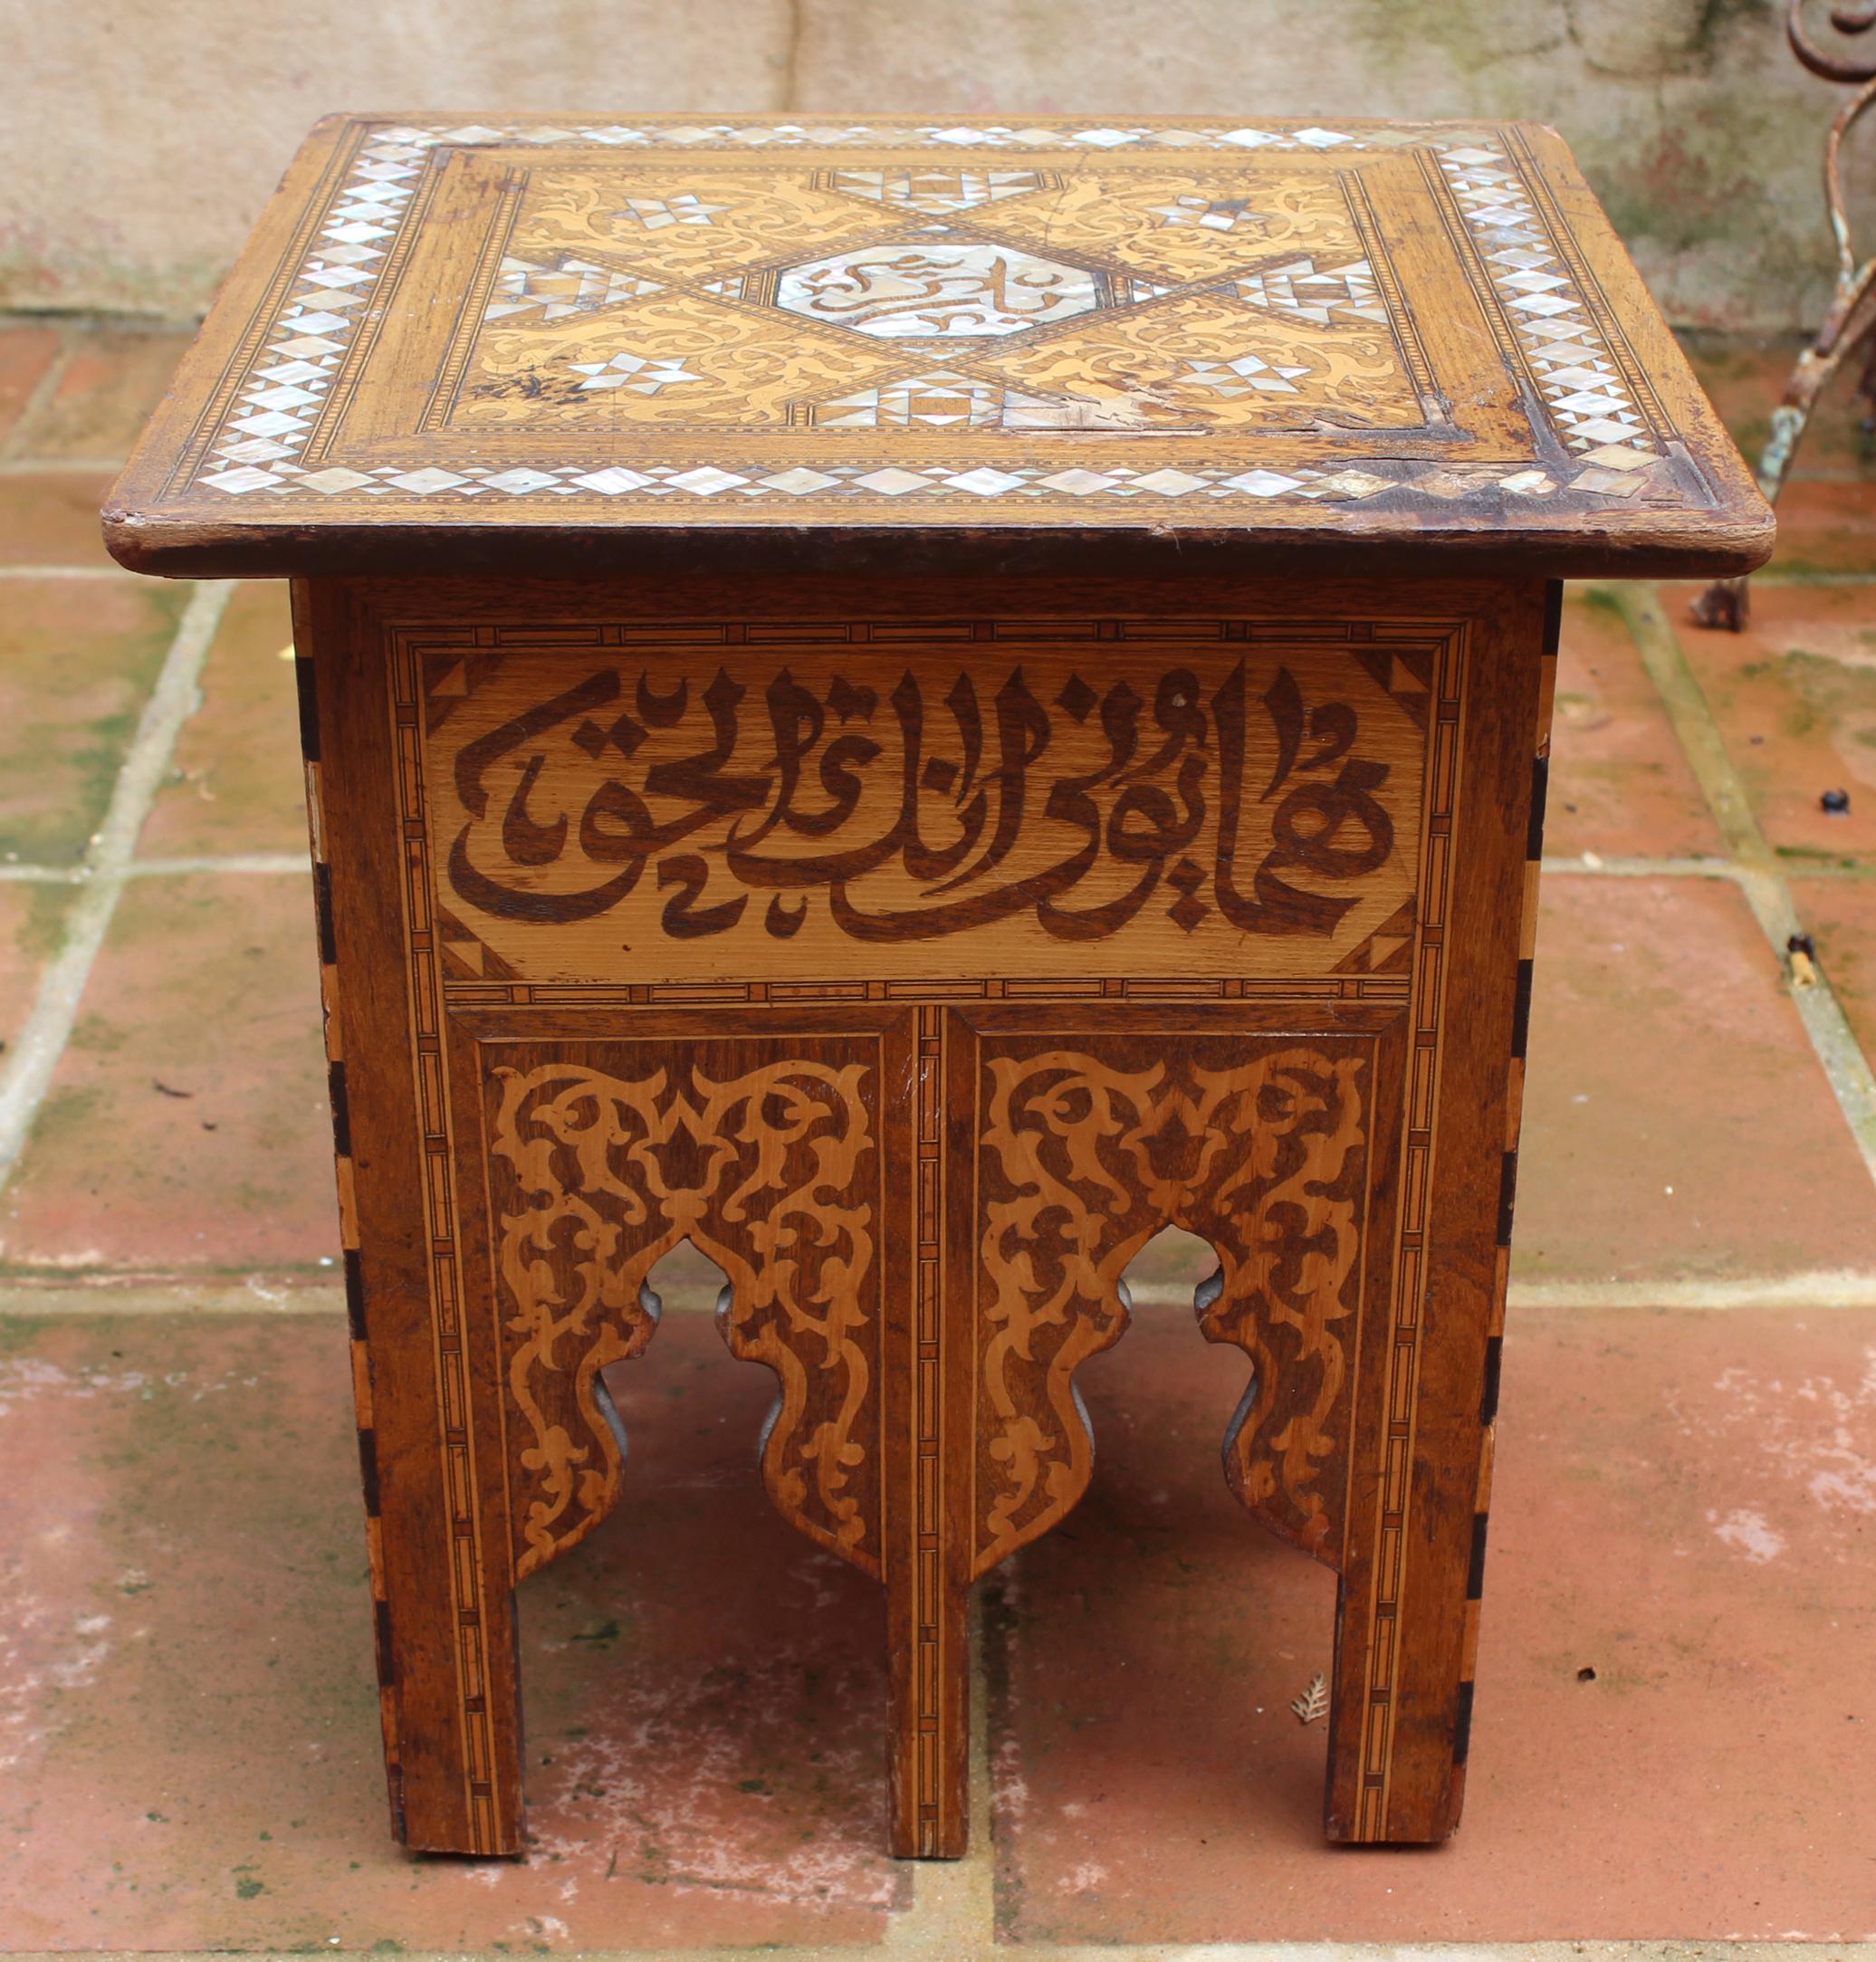 19th century Arabic coffee table richly decorated with mother of pearl inlay on the top, Geometric and Arabic writing inlay motifs with different woods on the side panels, ending in Islamic cut-out arches.

 